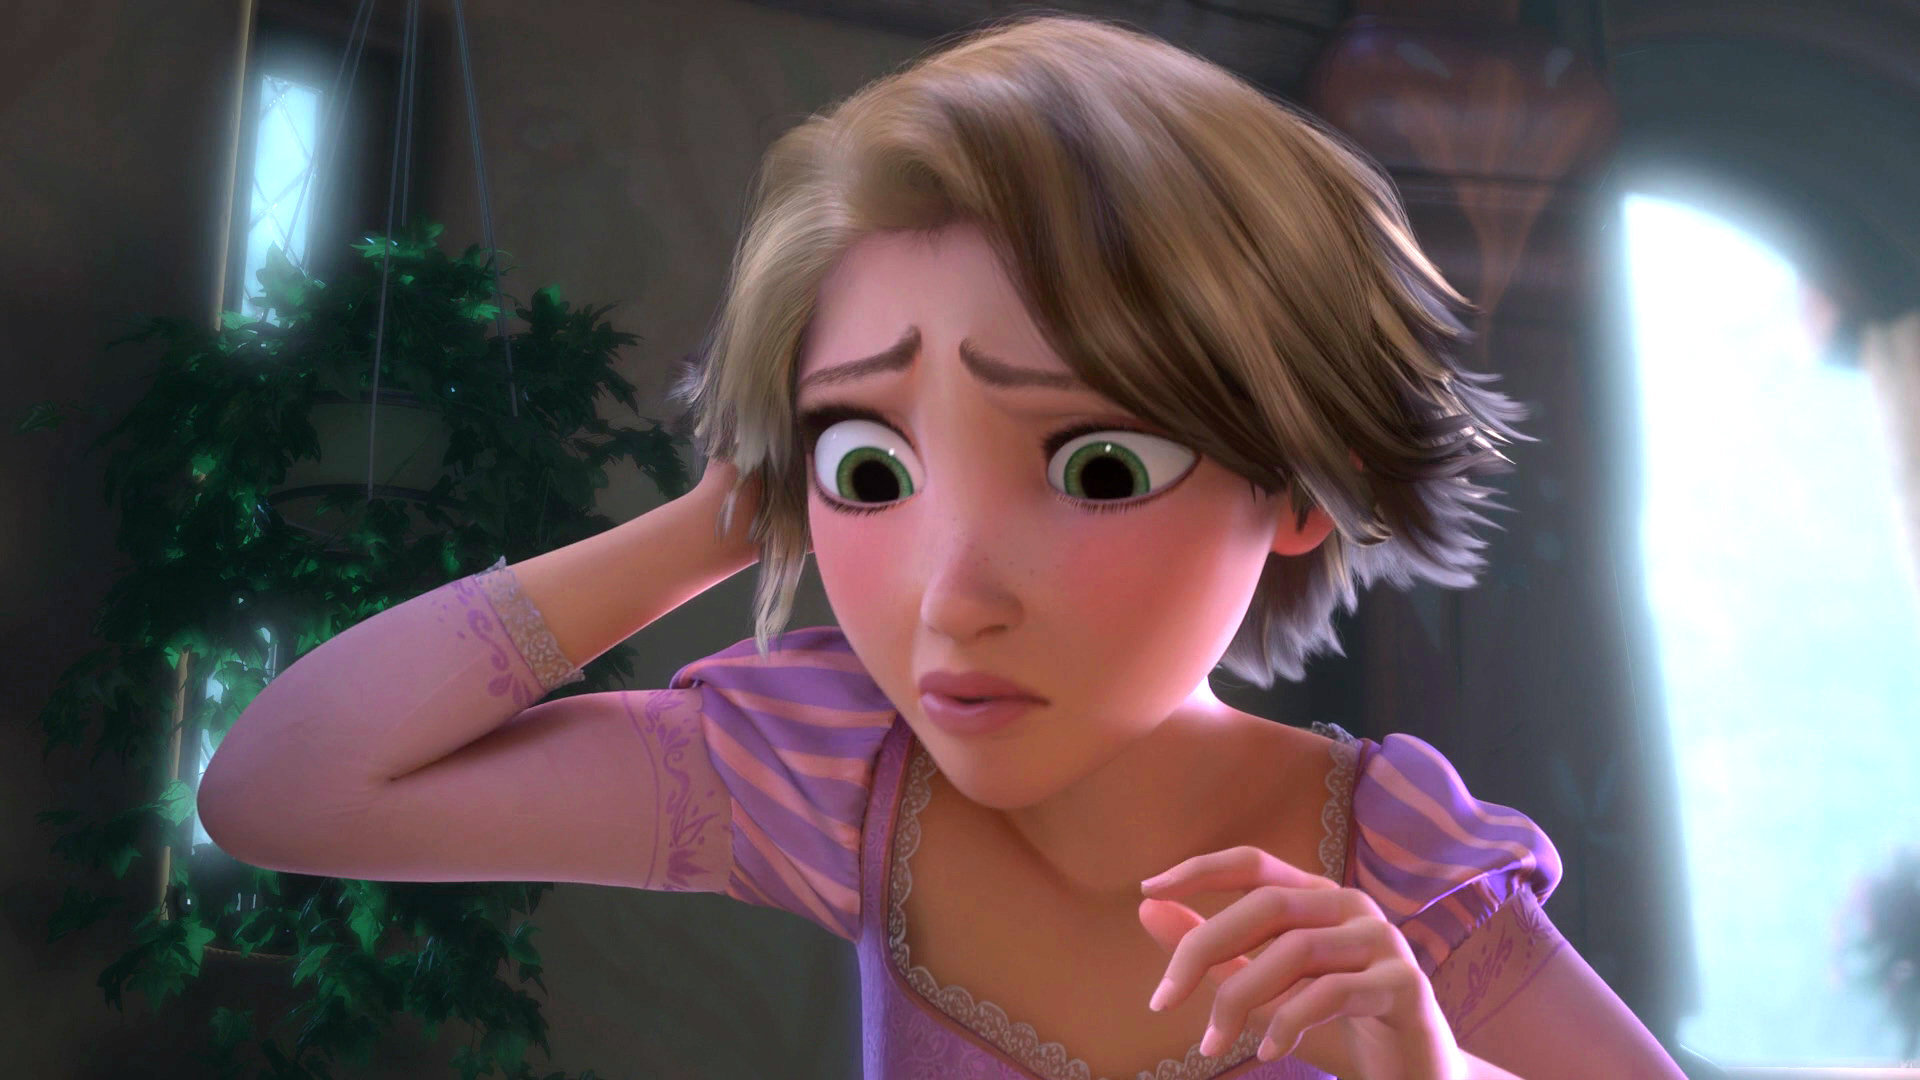 fanpop poll, does rapunzel still have healing magic within her once her hai...